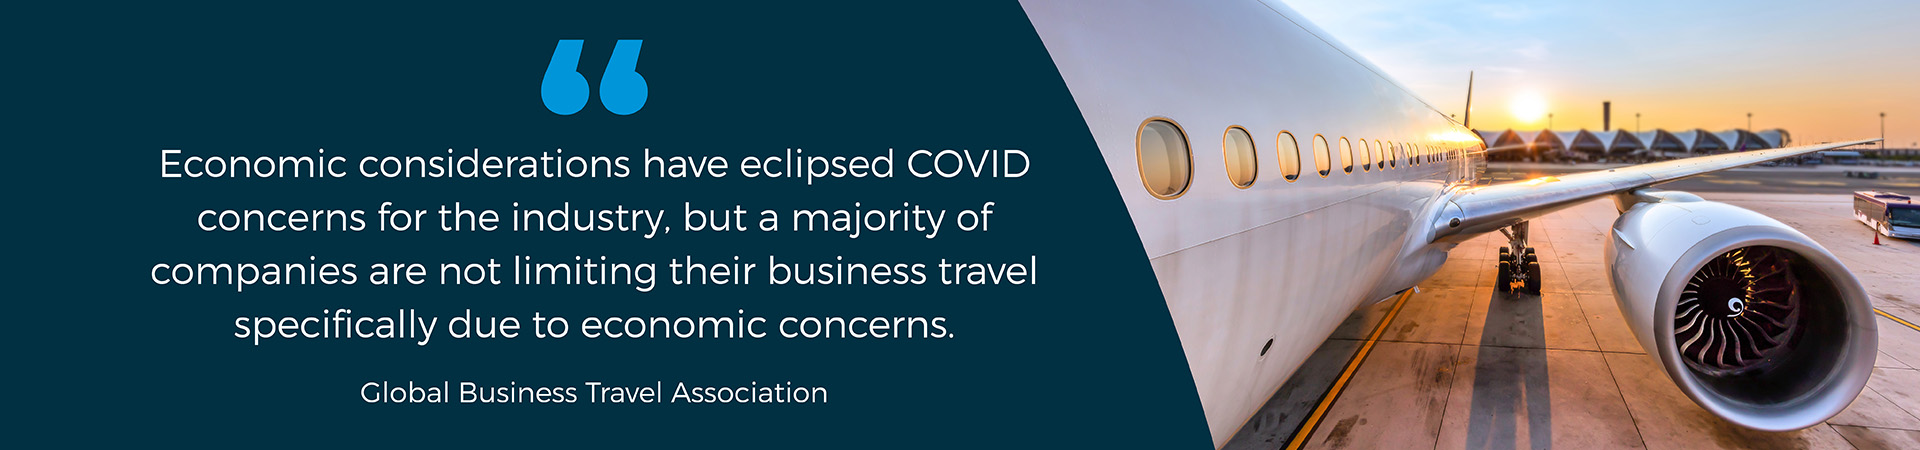 Banner - "Economic considerations have eclipsed COVID concerns for the industry, but a majority of companies are not limiting their business travel specifically due to economic conerns" Global Business Travel Association quote